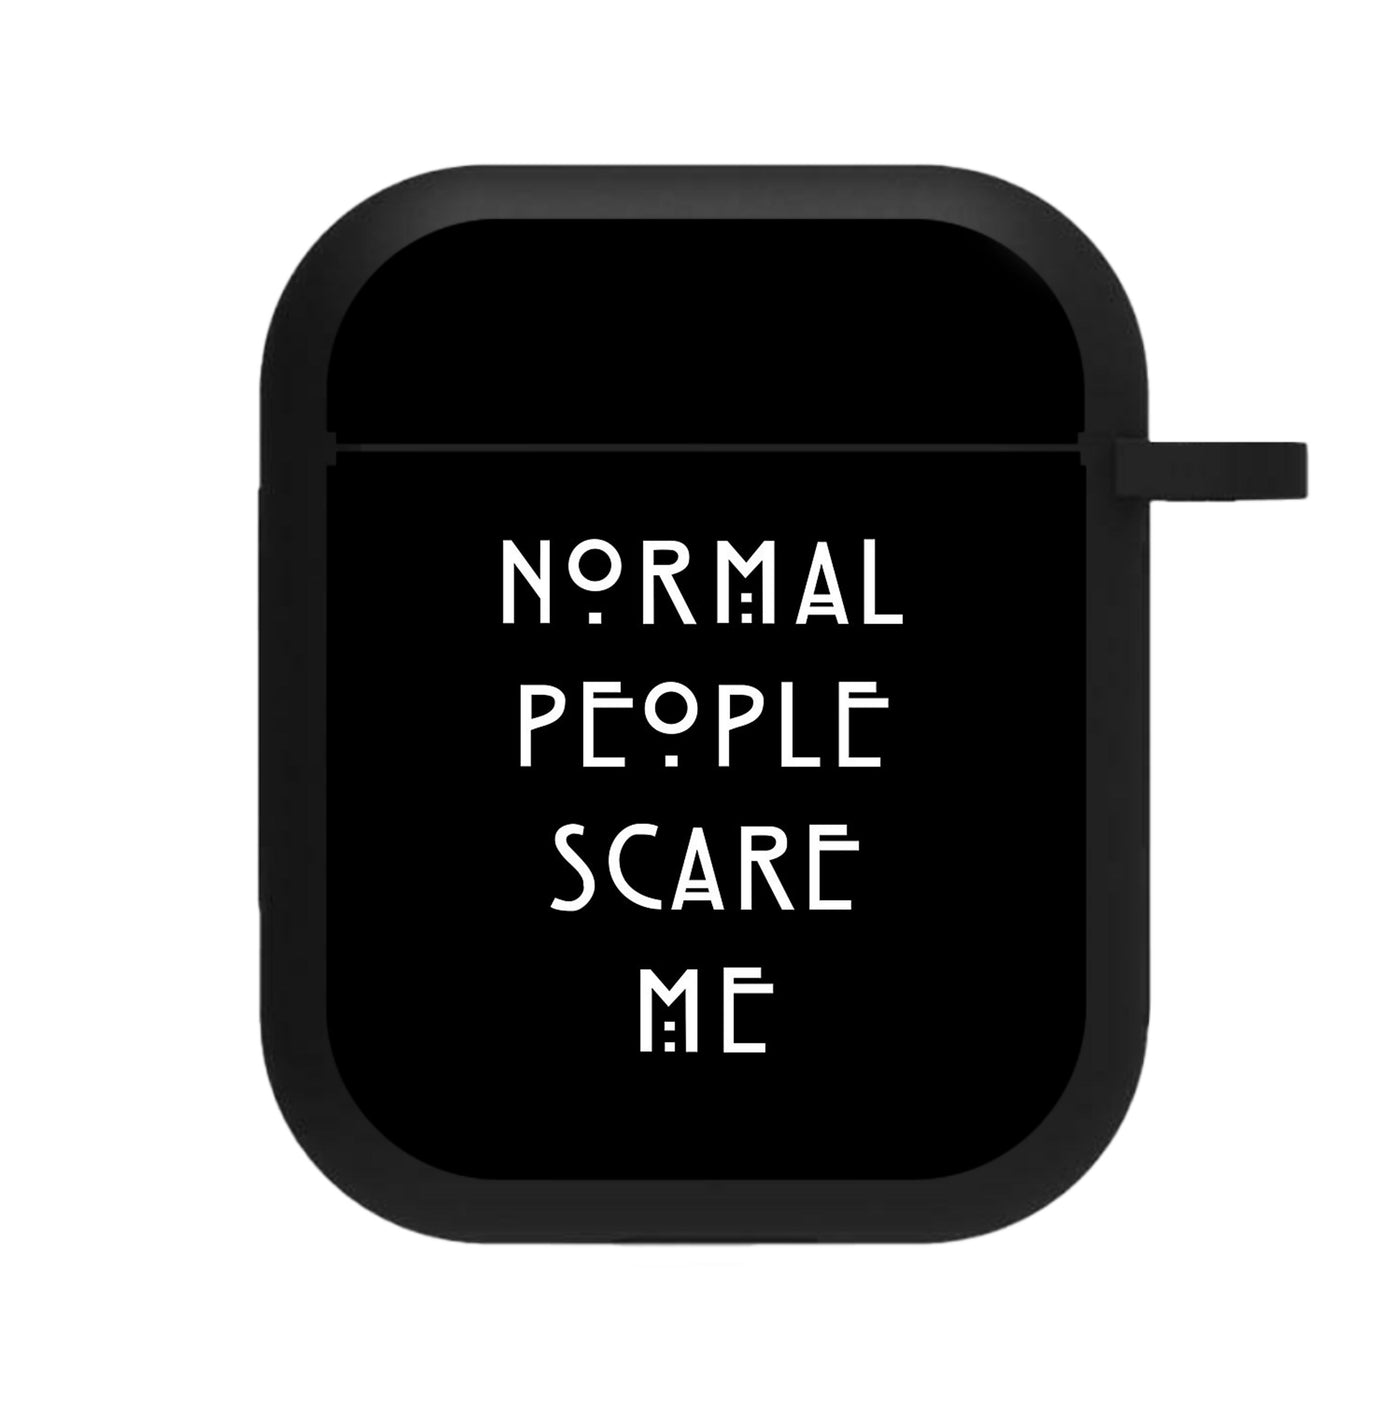 Normal People Scare Me - Black American Horror Story AirPods Case